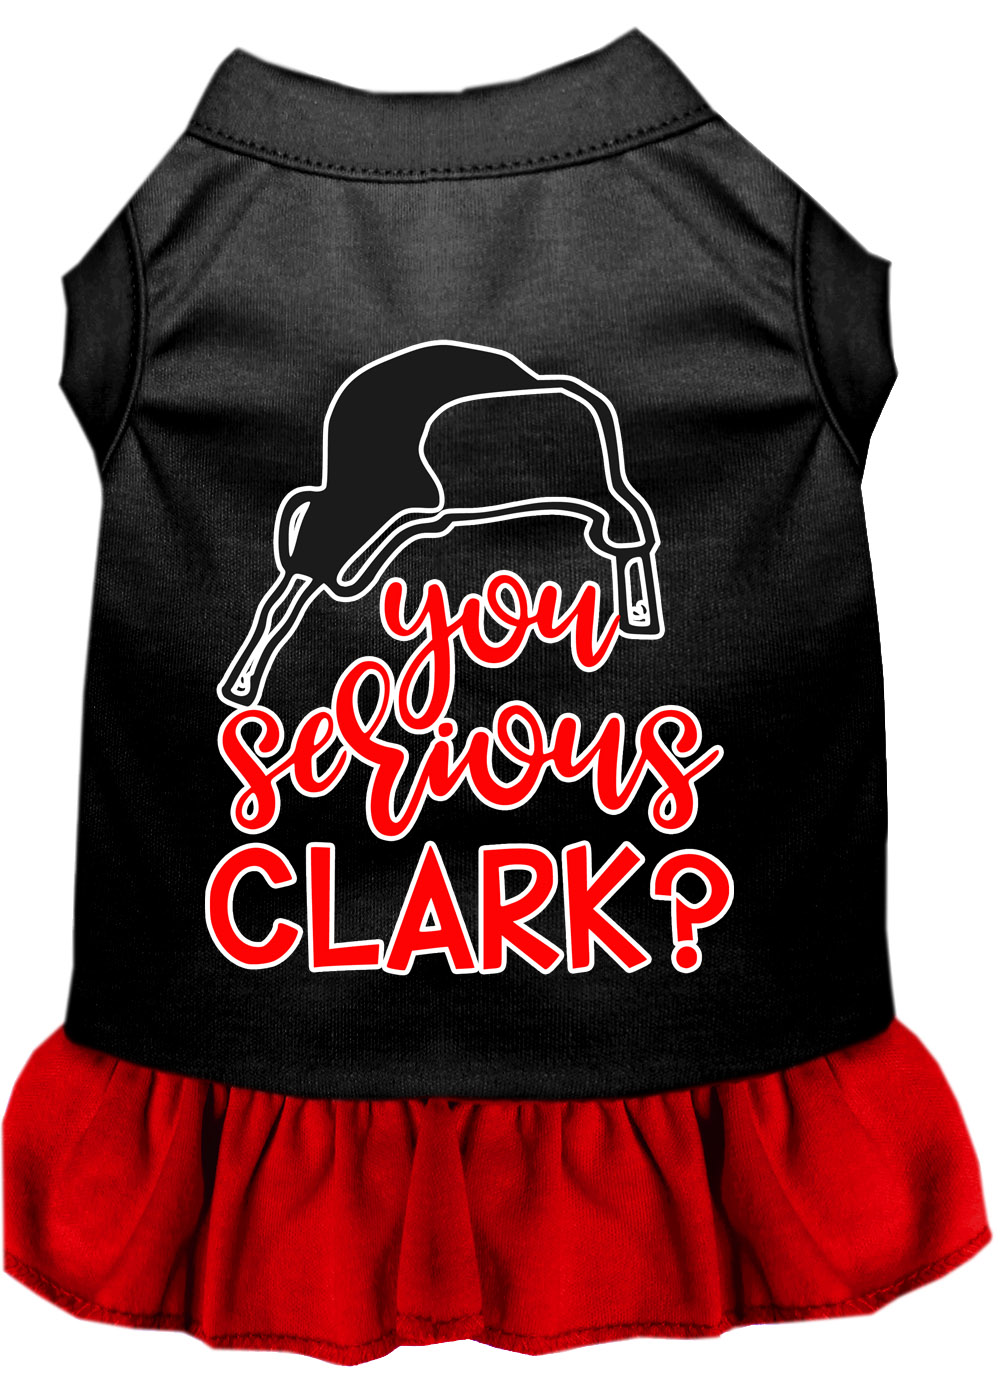 You Serious Clark? Screen Print Dog Dress Black with Red XS